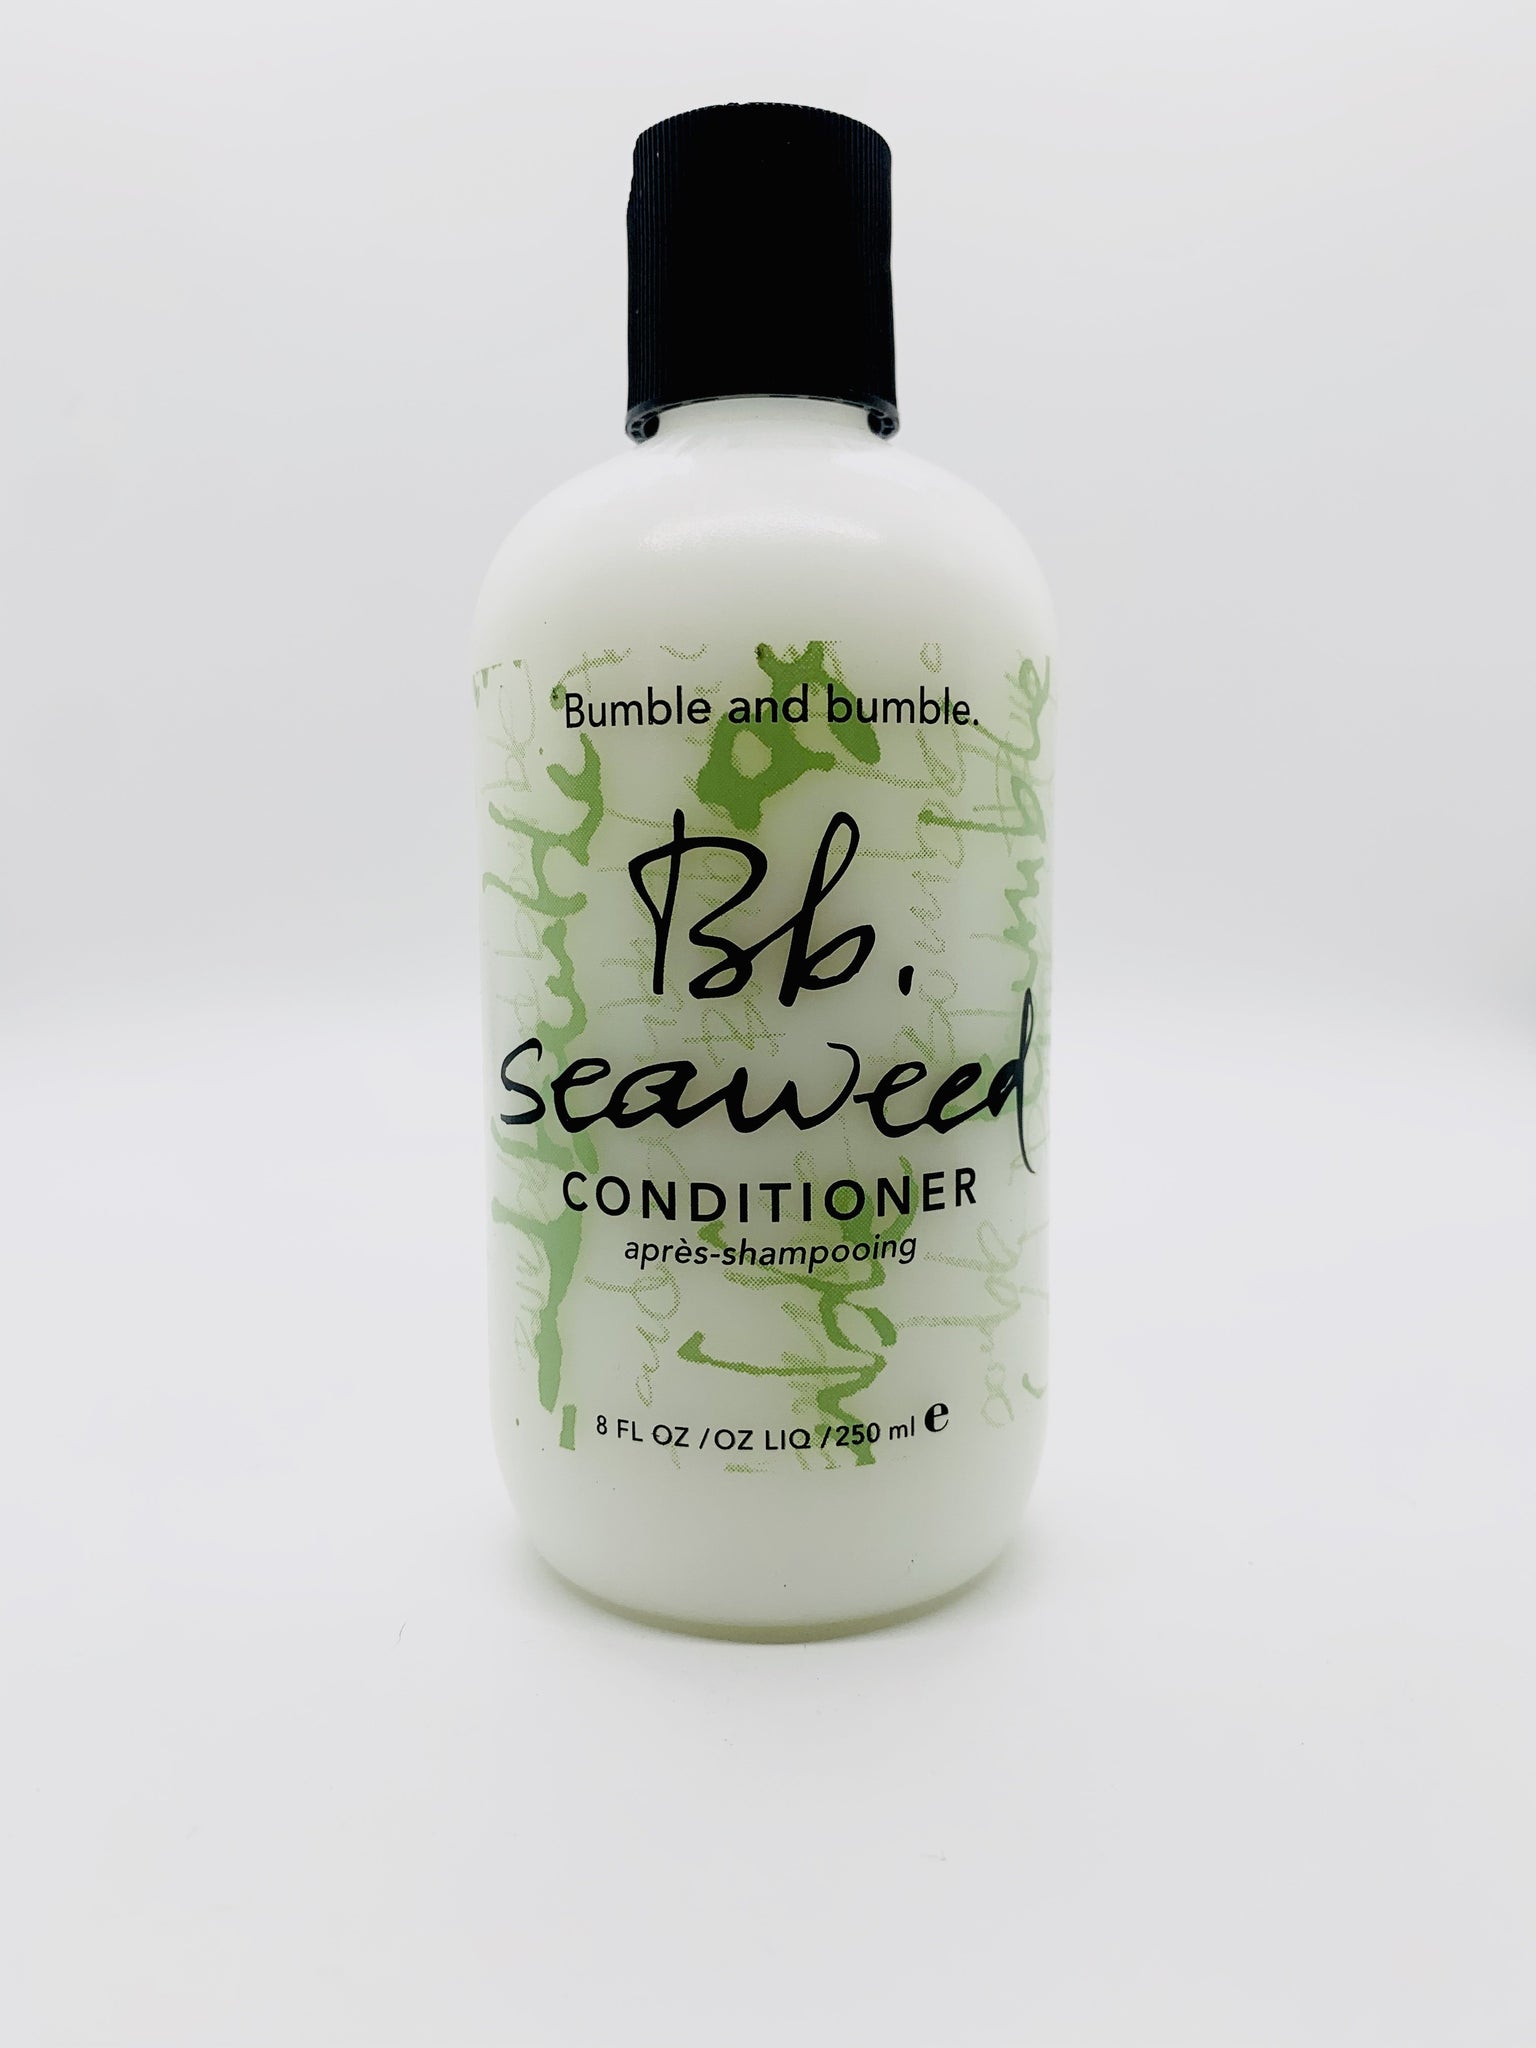 Bumble and Bumble Bb Seaweed Conditioner 8 oz